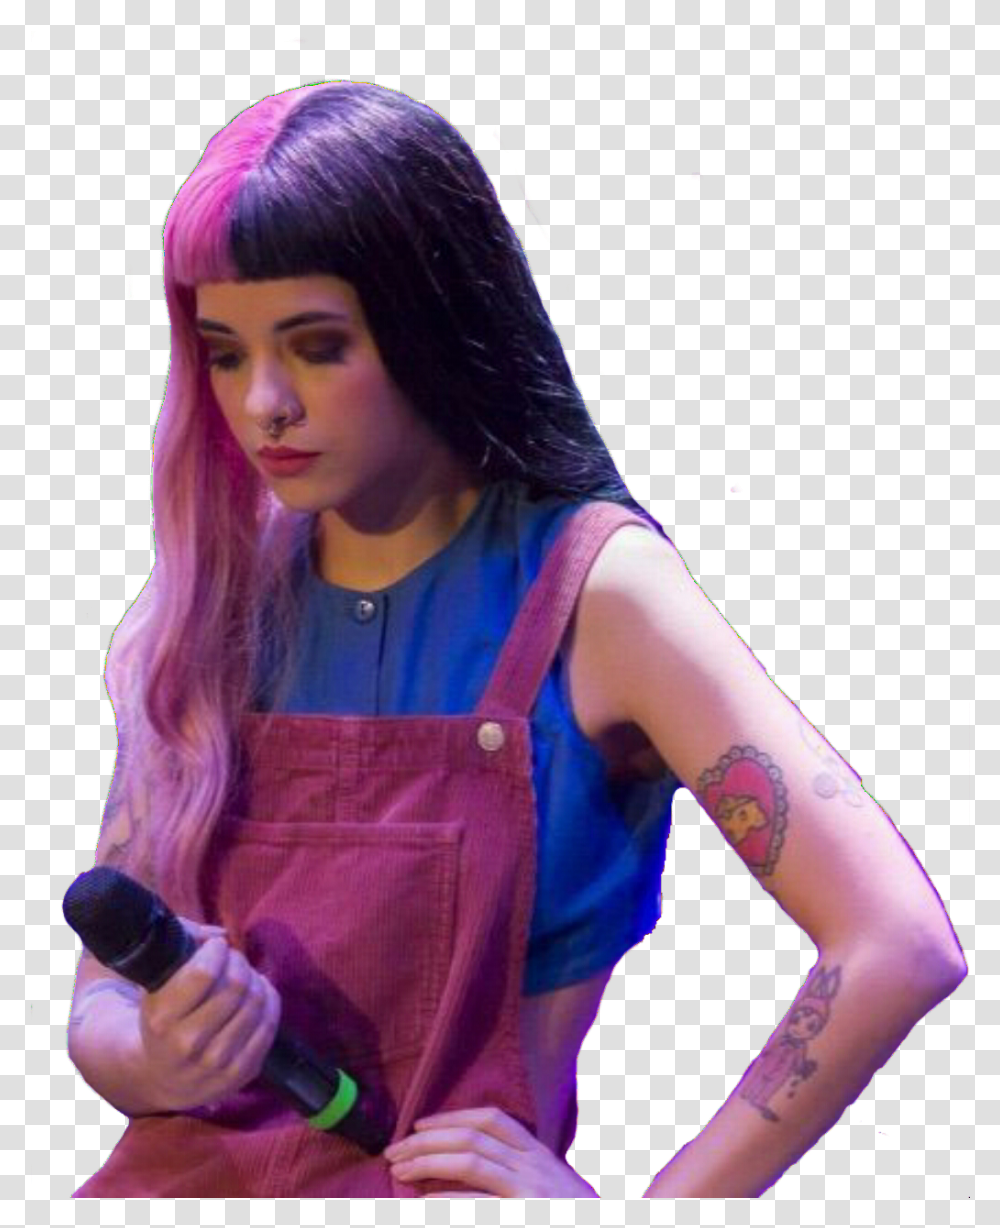 Images About Melanie Martinez Concert Opening, Skin, Person, Sleeve, Clothing Transparent Png